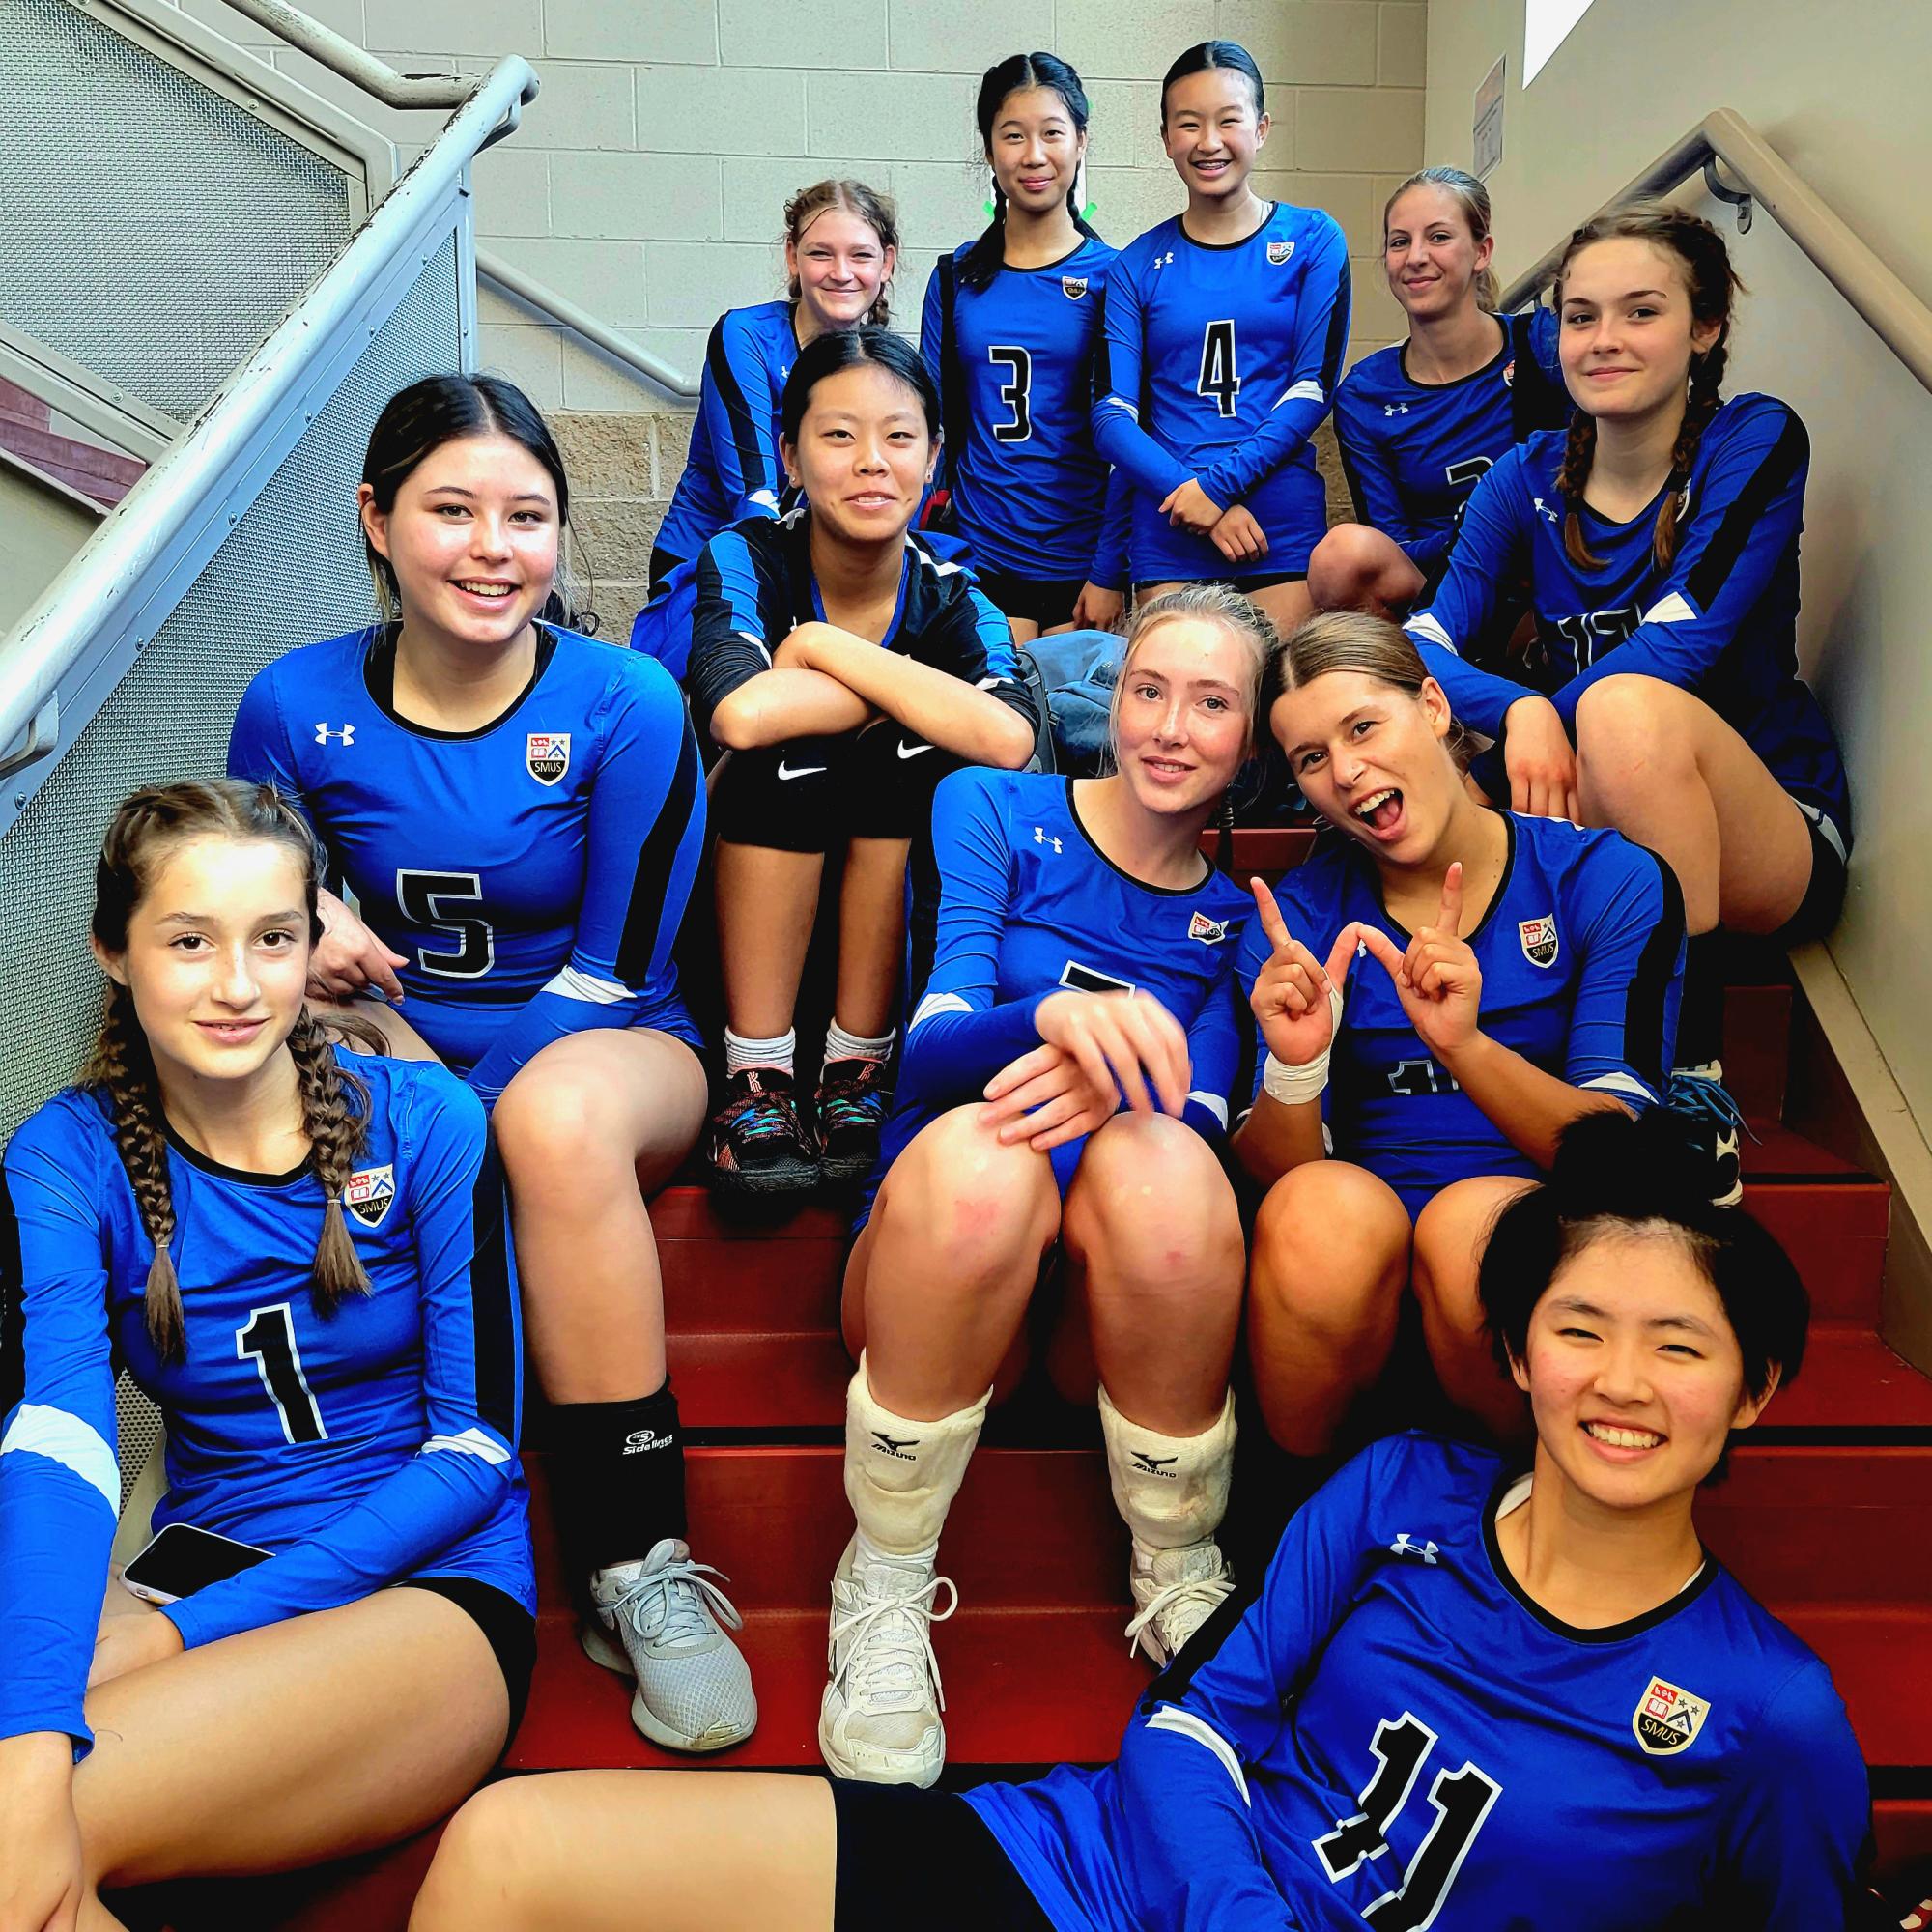 The Junior Girls Volleyball team poses together after a win at the Camosun tournament